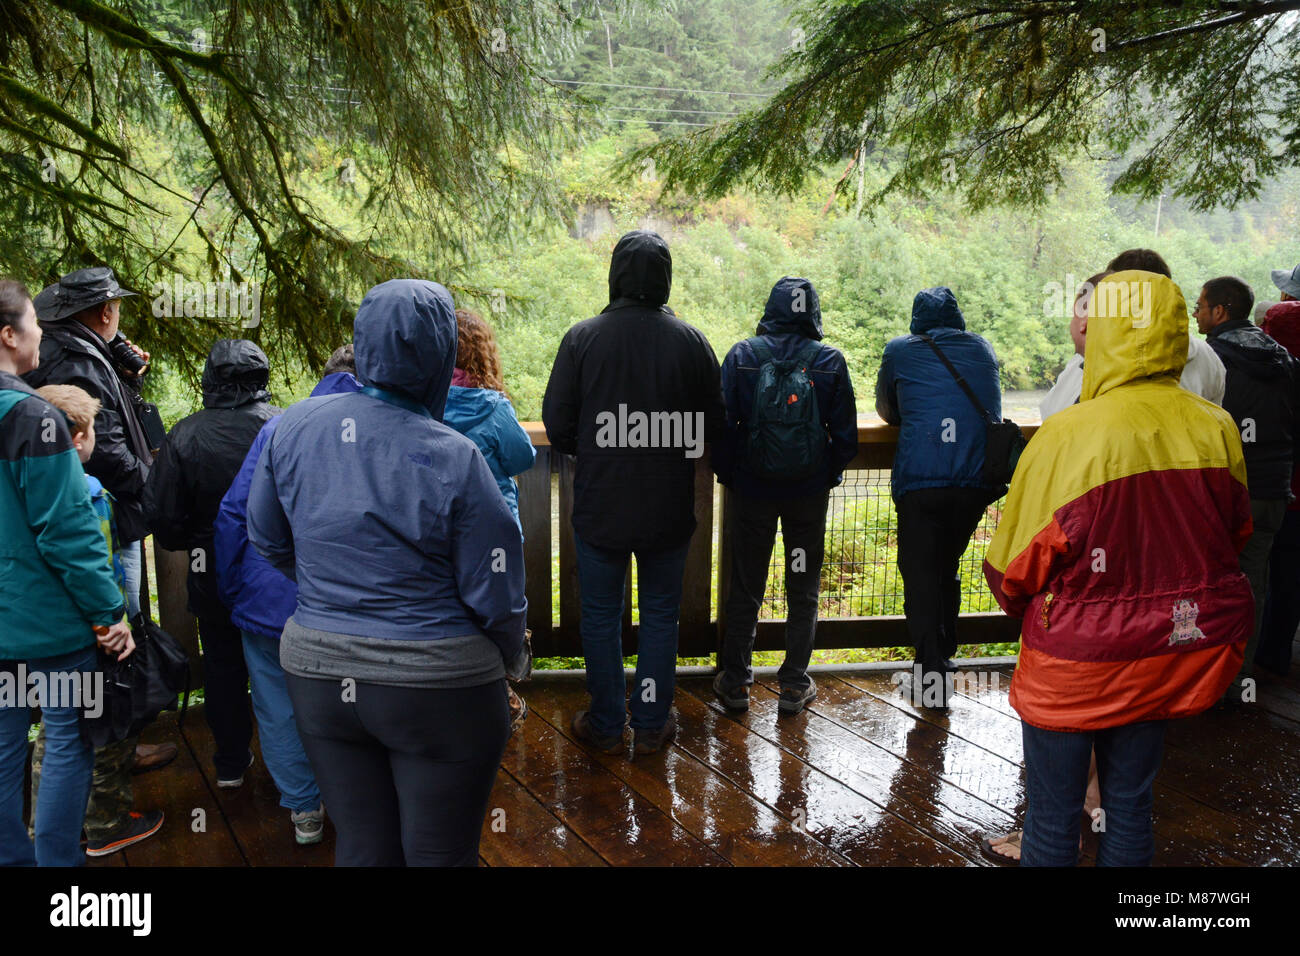 Tourists on the bear viewing platform at the Fish Creek Wildlife Observation Site, in the Tongass National Forest, near Hyder, Alaska. Stock Photo